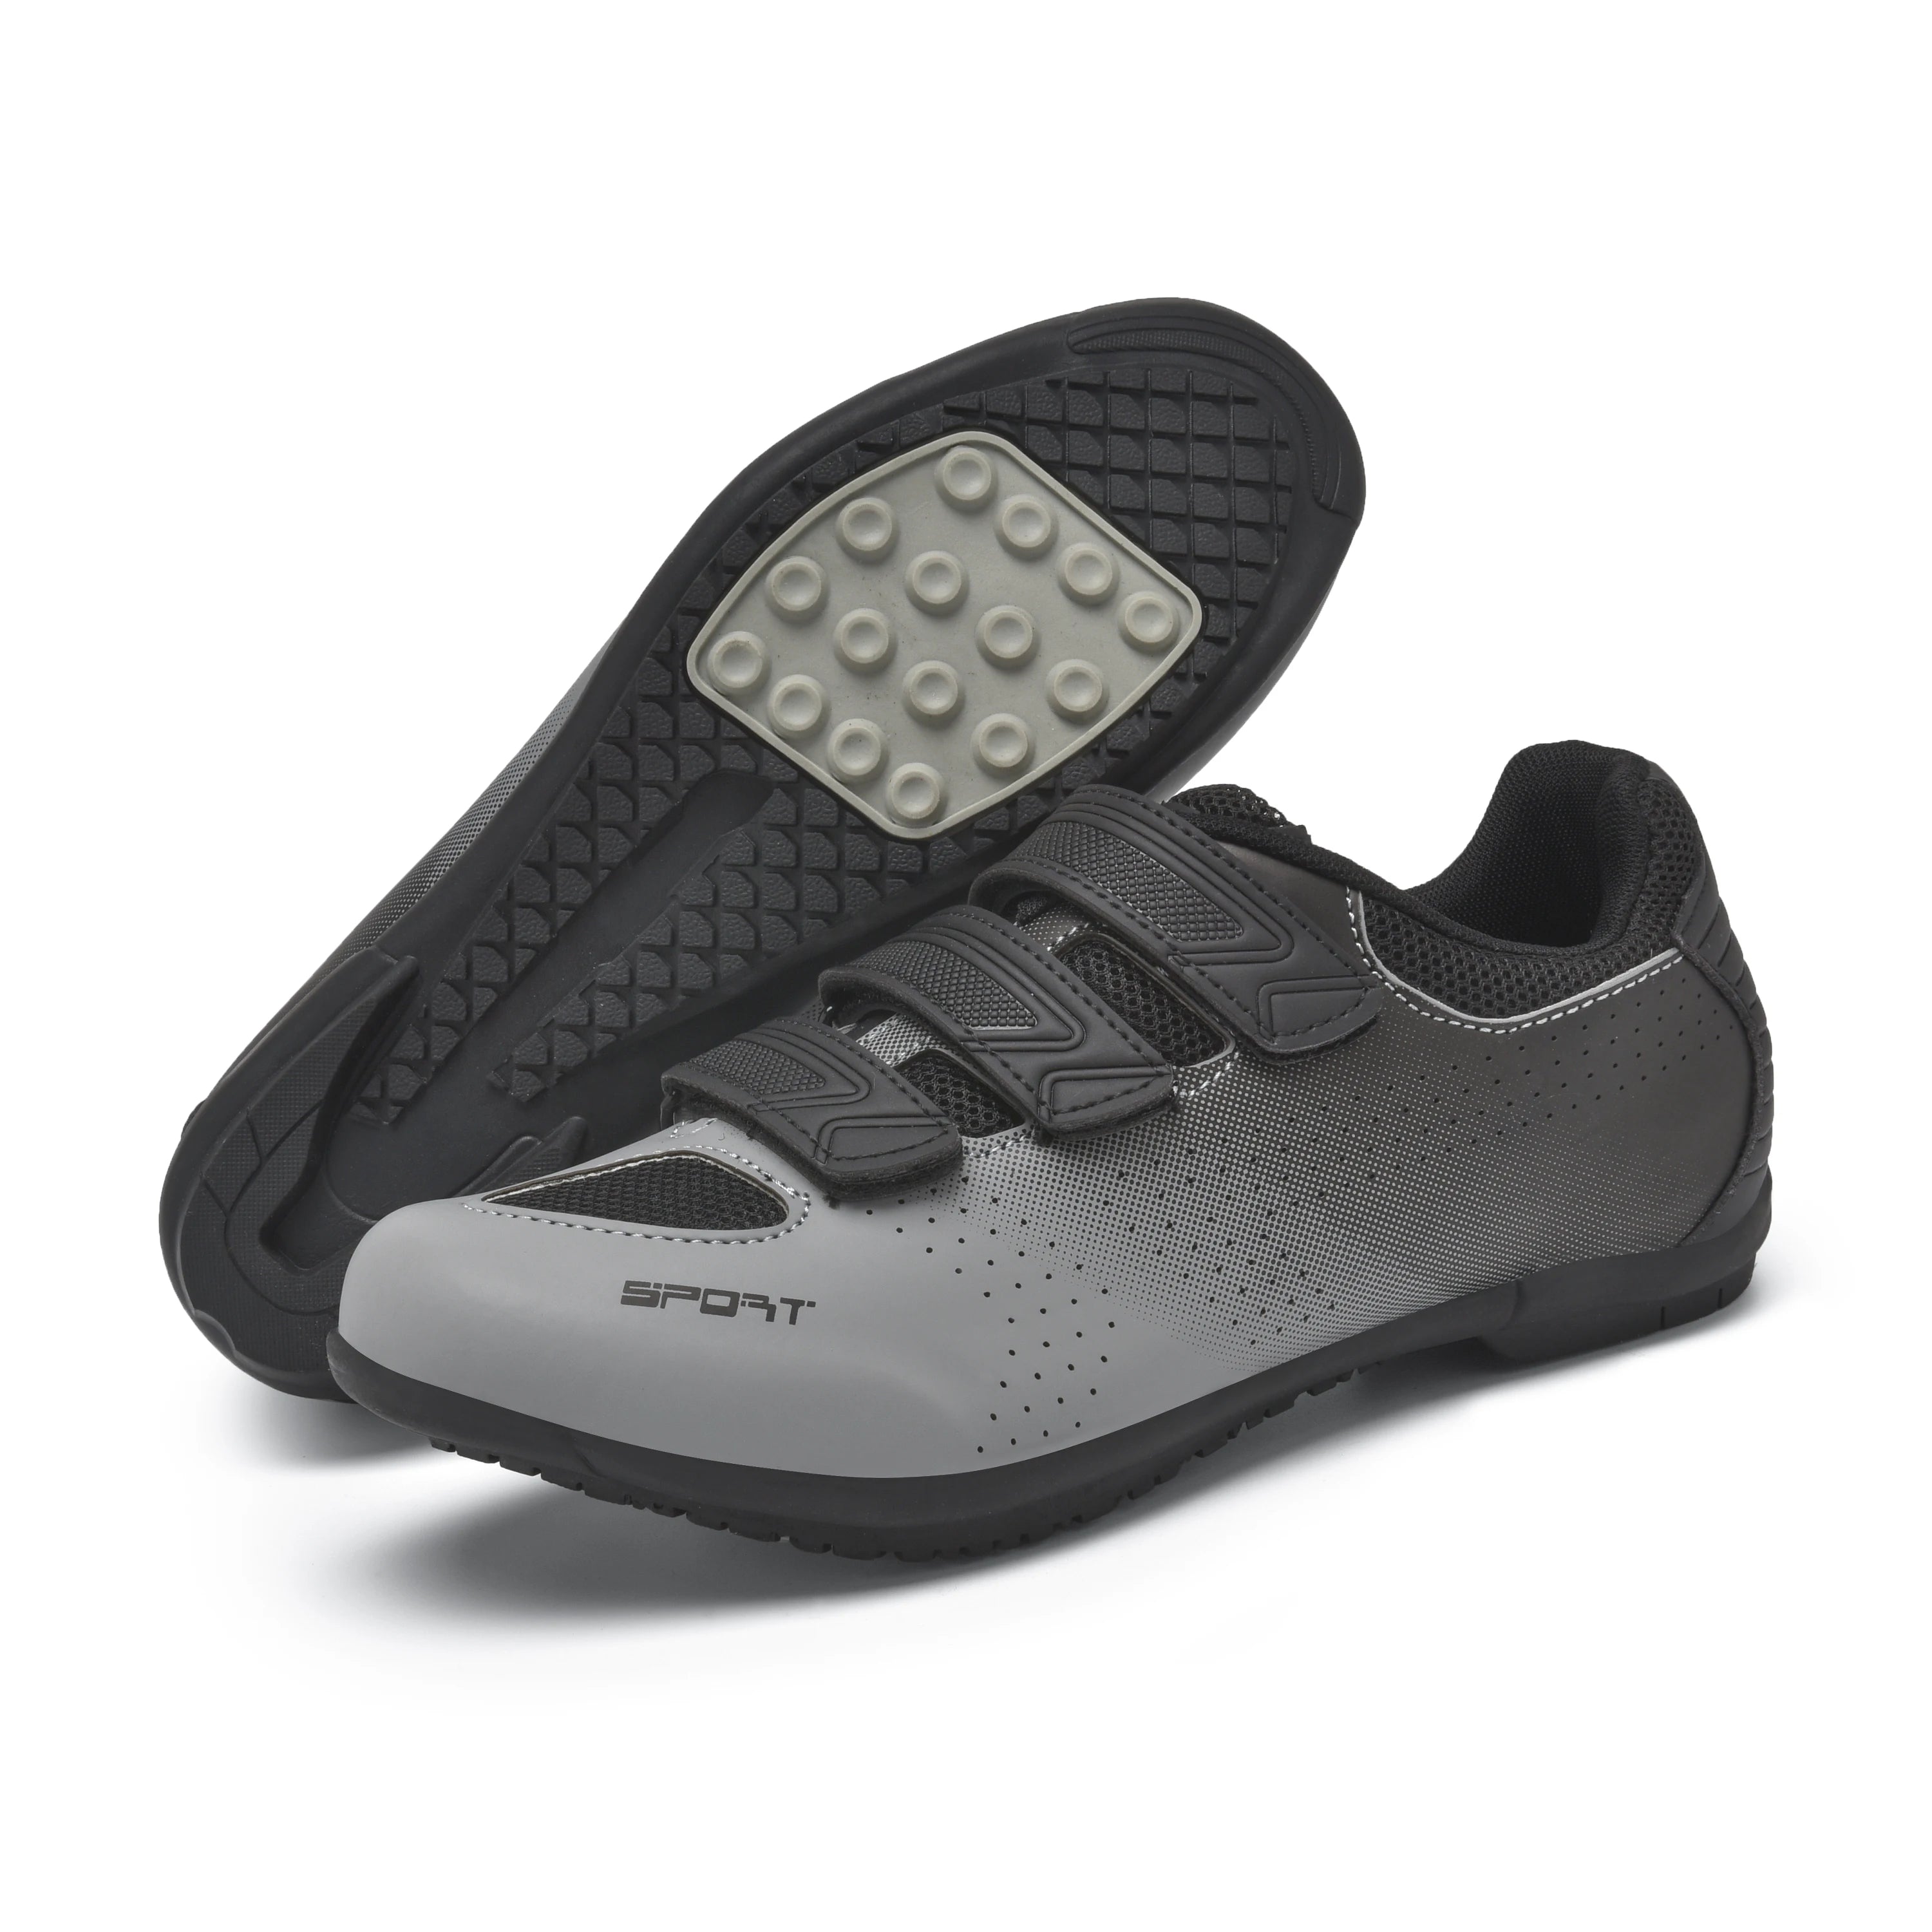 Women Cycling Shoes for Road or Mountain bike- With Cleats,  Cleatless, or flat rubber grey